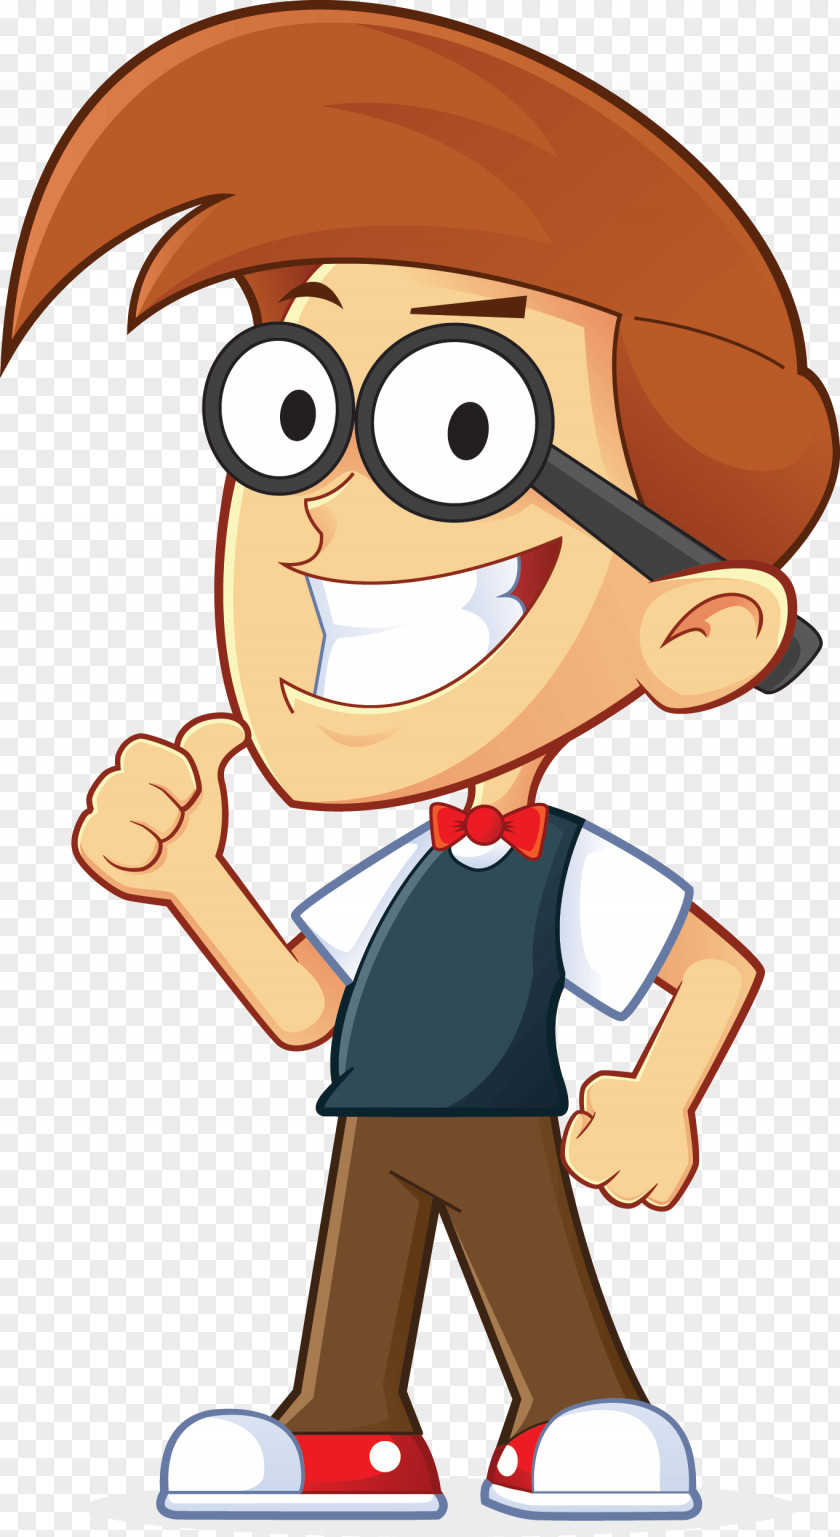 Geeks Cartoon Character Animation Clip Art PNG